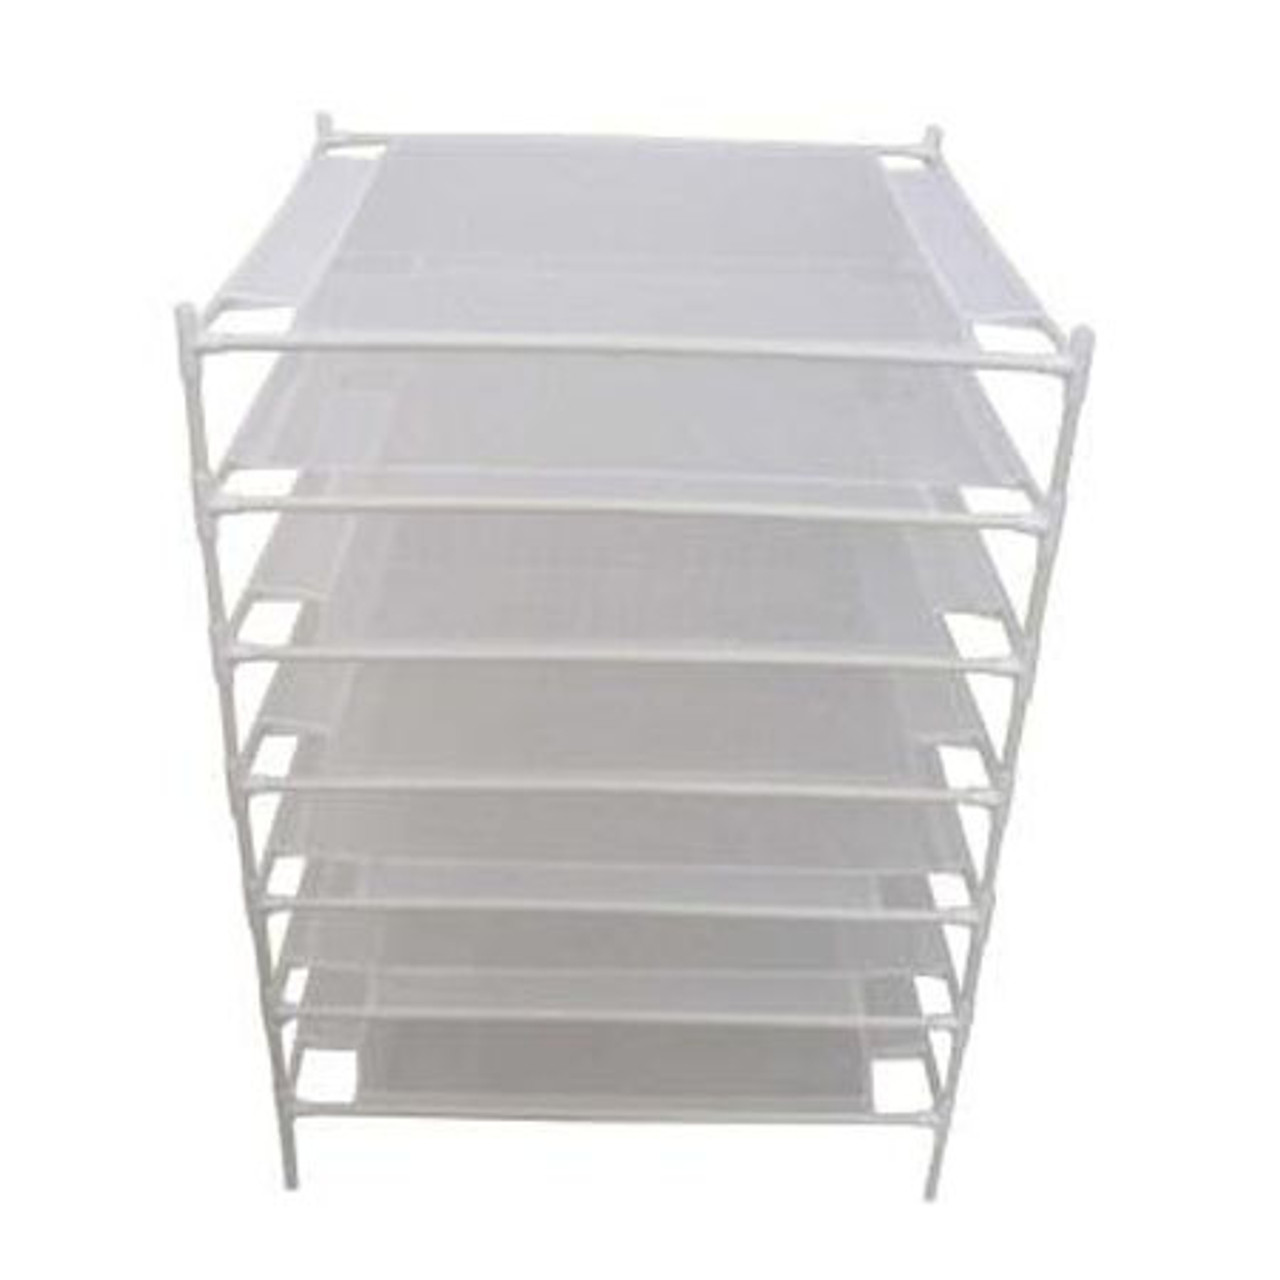 drying rack stackable plastic frame